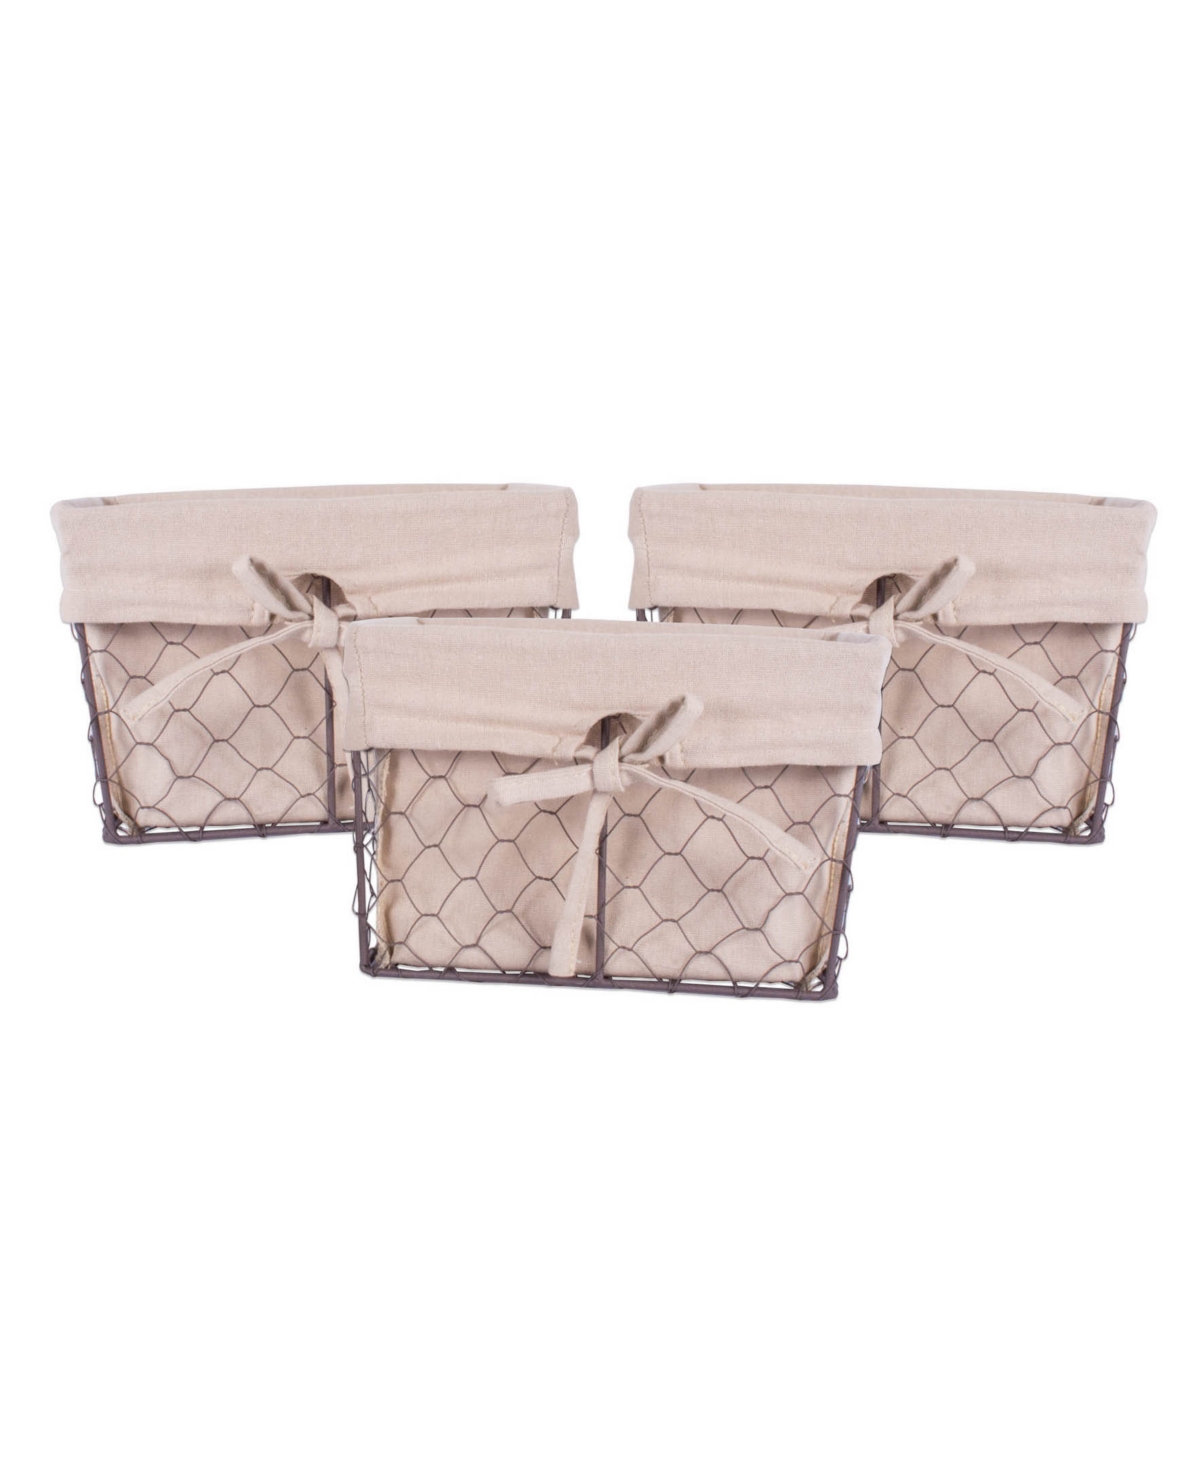 Small Chicken Wire Liner Basket Set of 3 - Natural